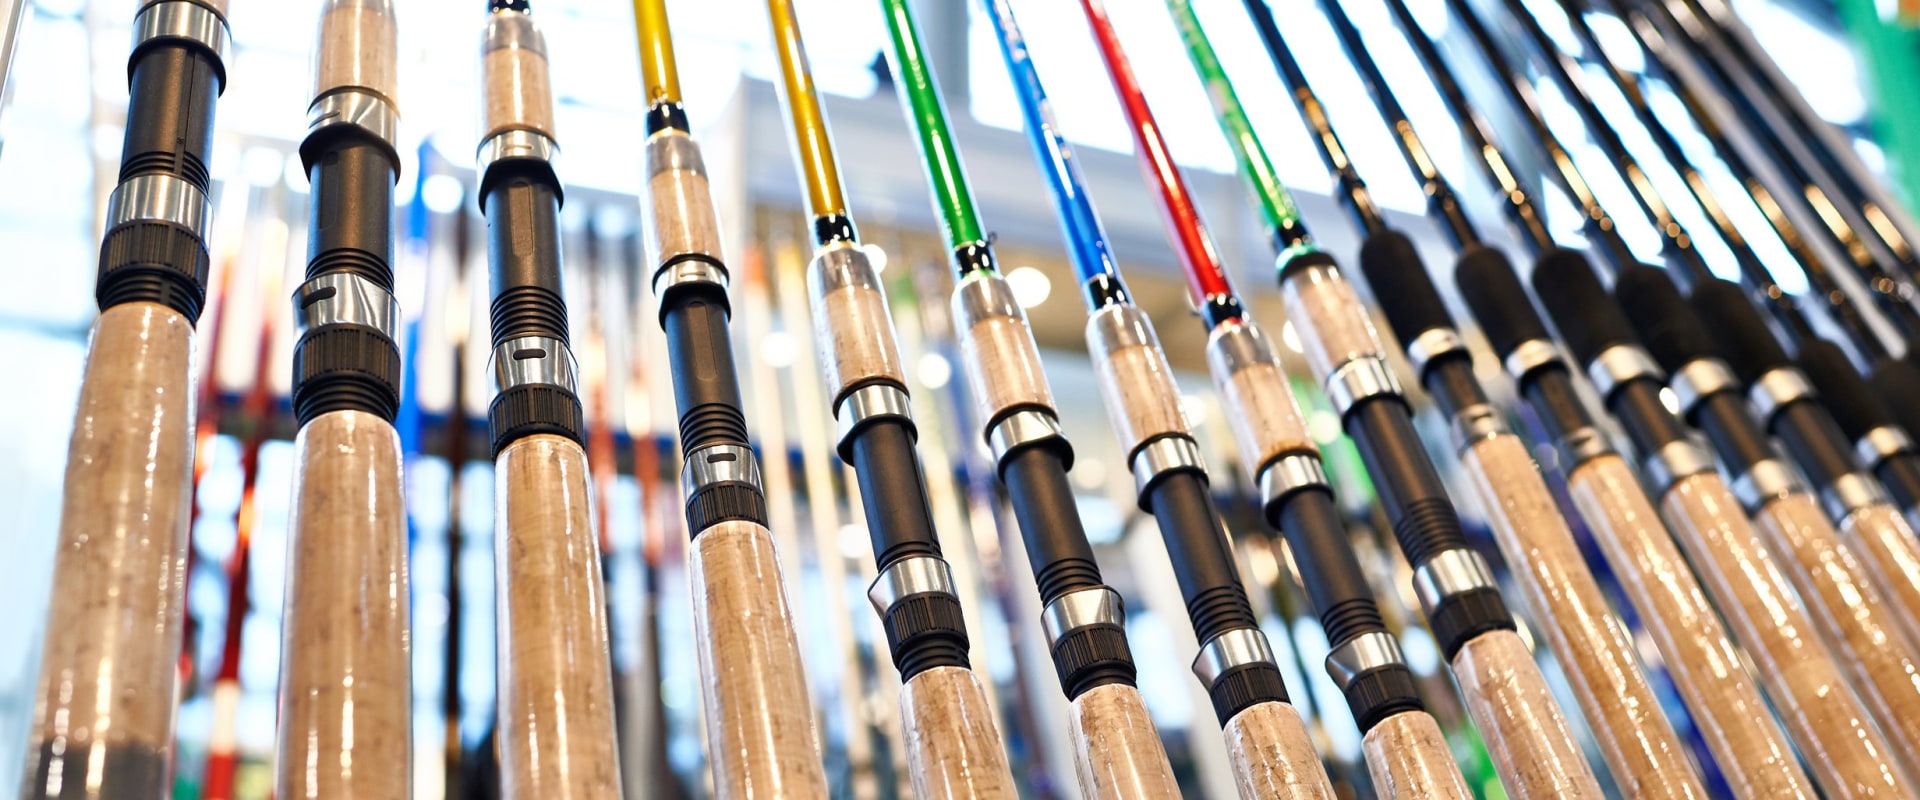 What kind of fishing pole do i need in florida?